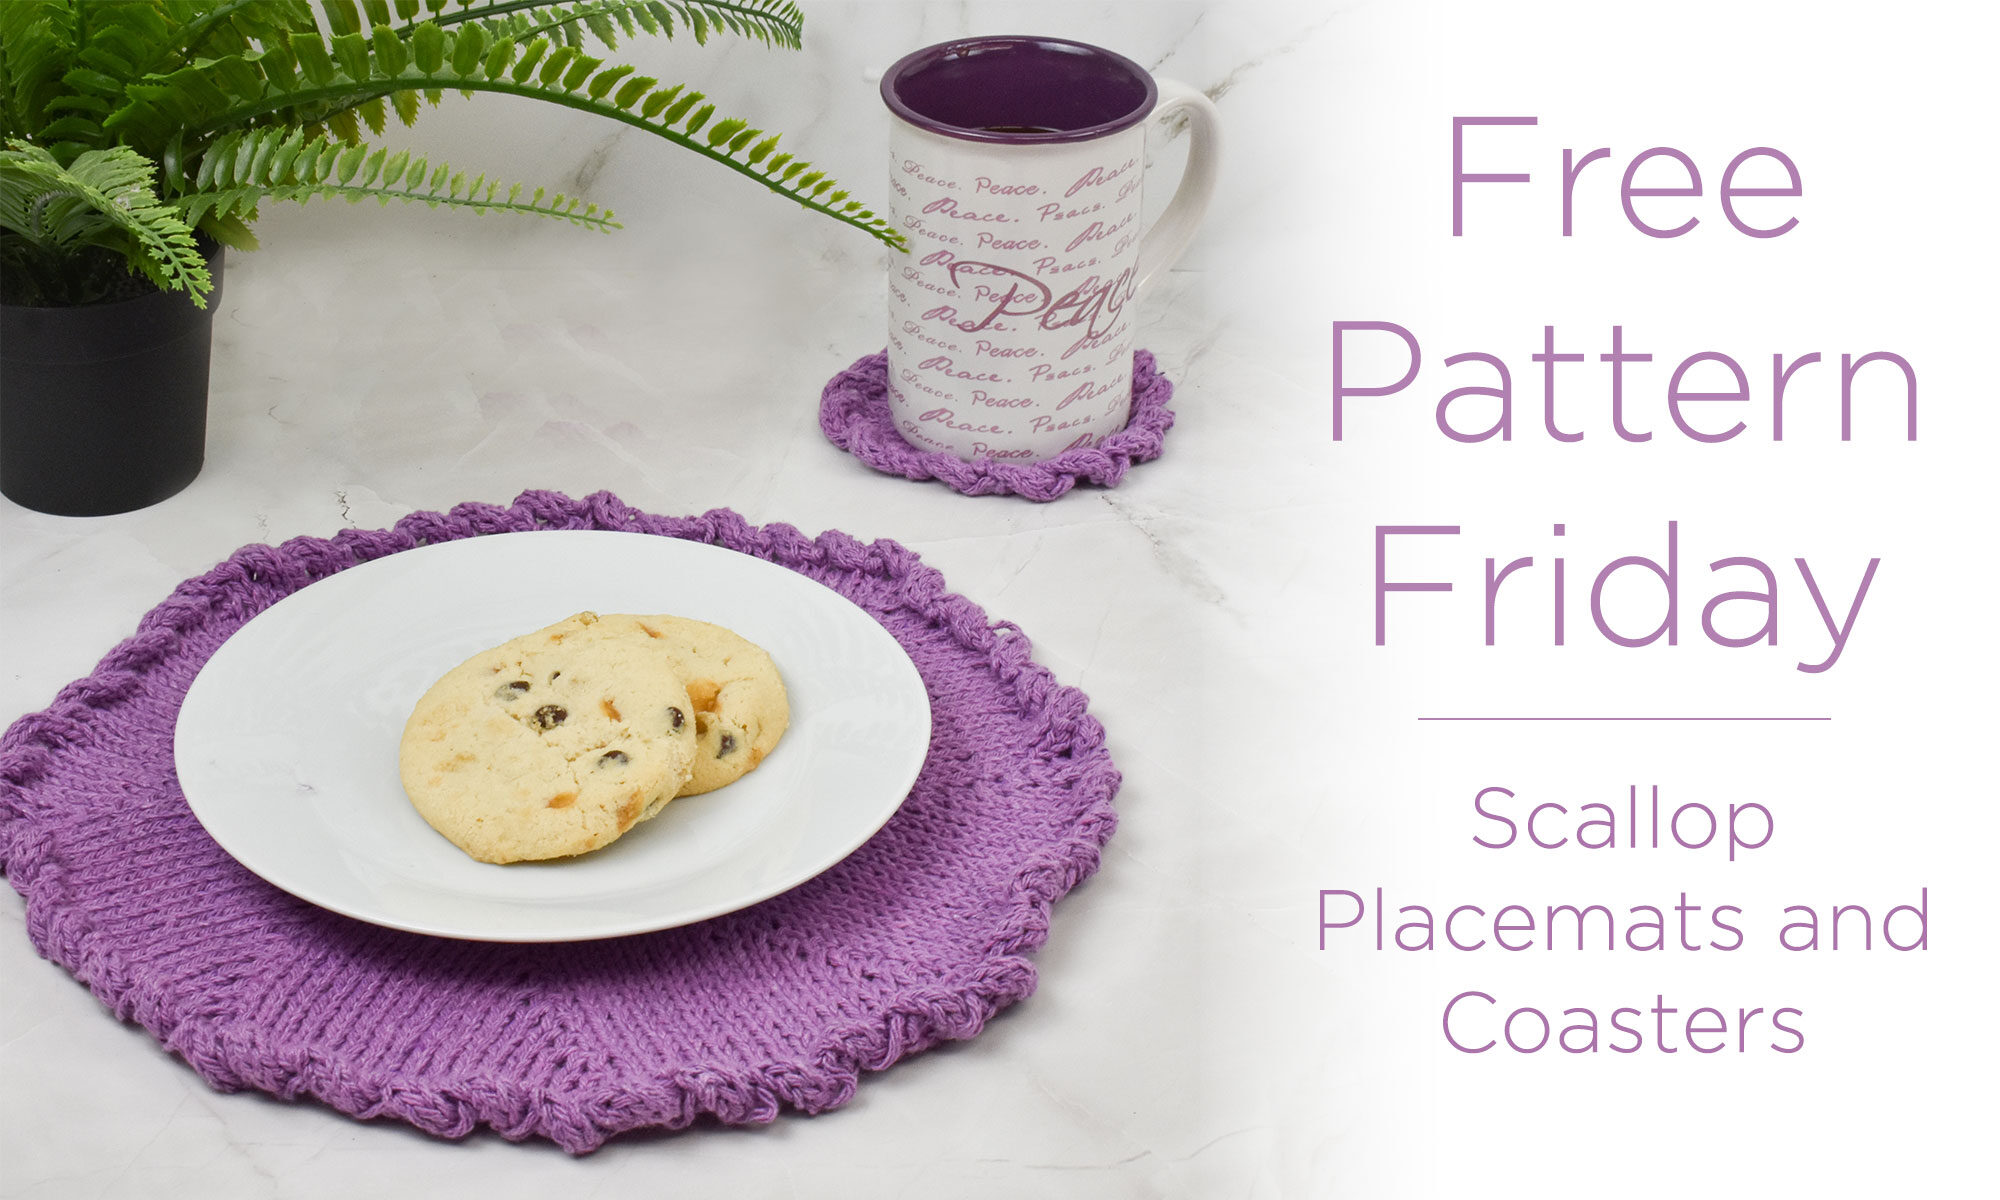 Photo of the Scallop Placemats and Coasters with text to the right saying "Free Pattern Friday - Scallop Placemats and Coasters"